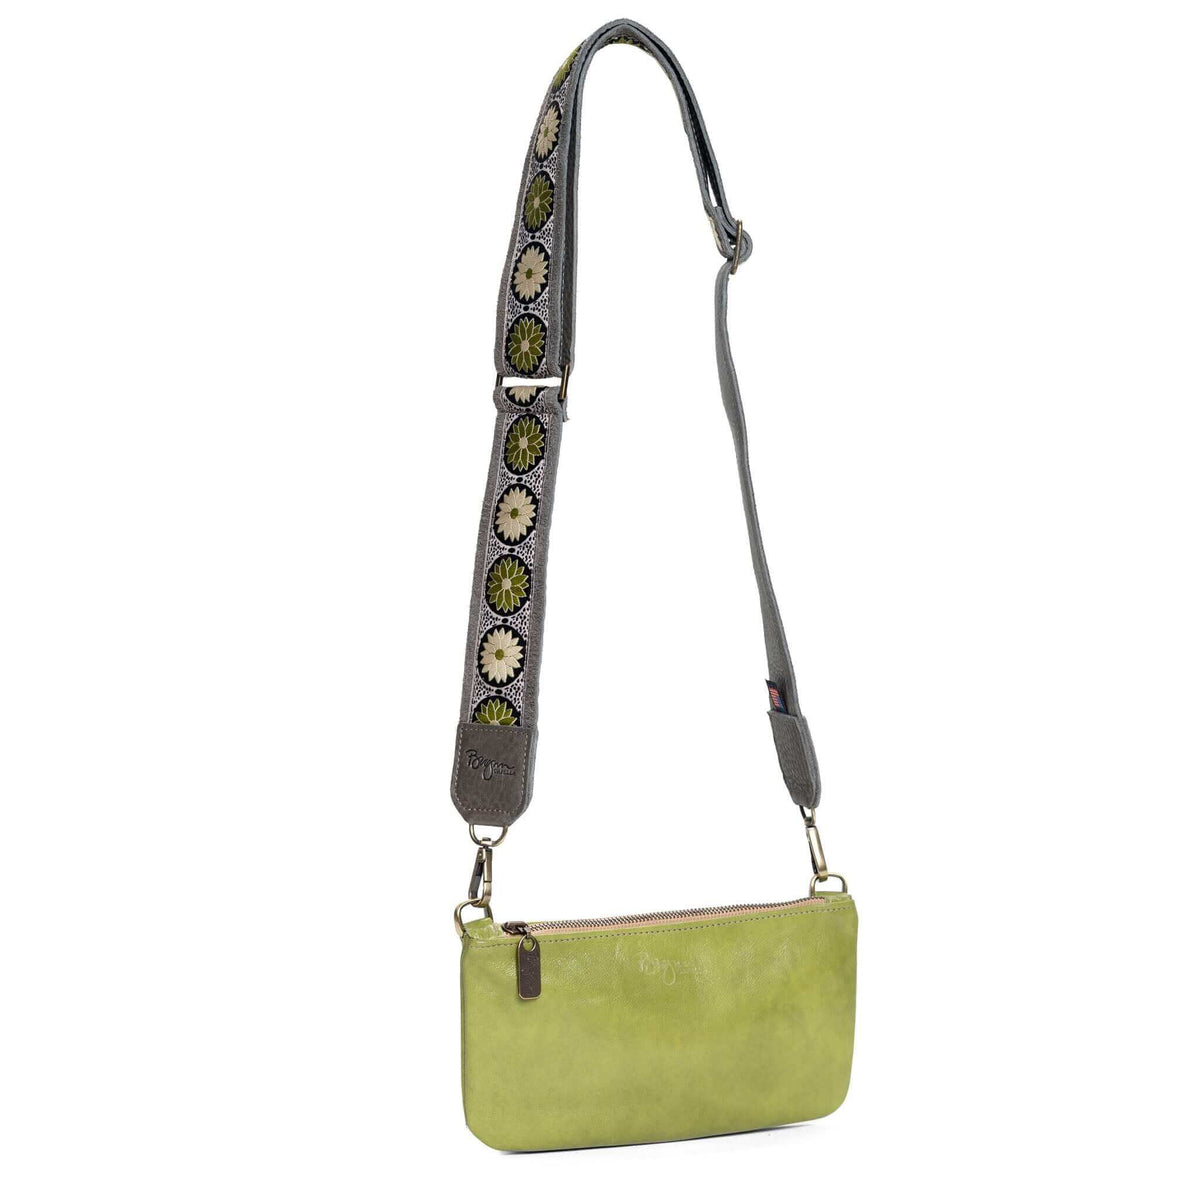 Cher Mini Corssbody in lime green, clutch, wallet, Brynn Capella, made in the USA